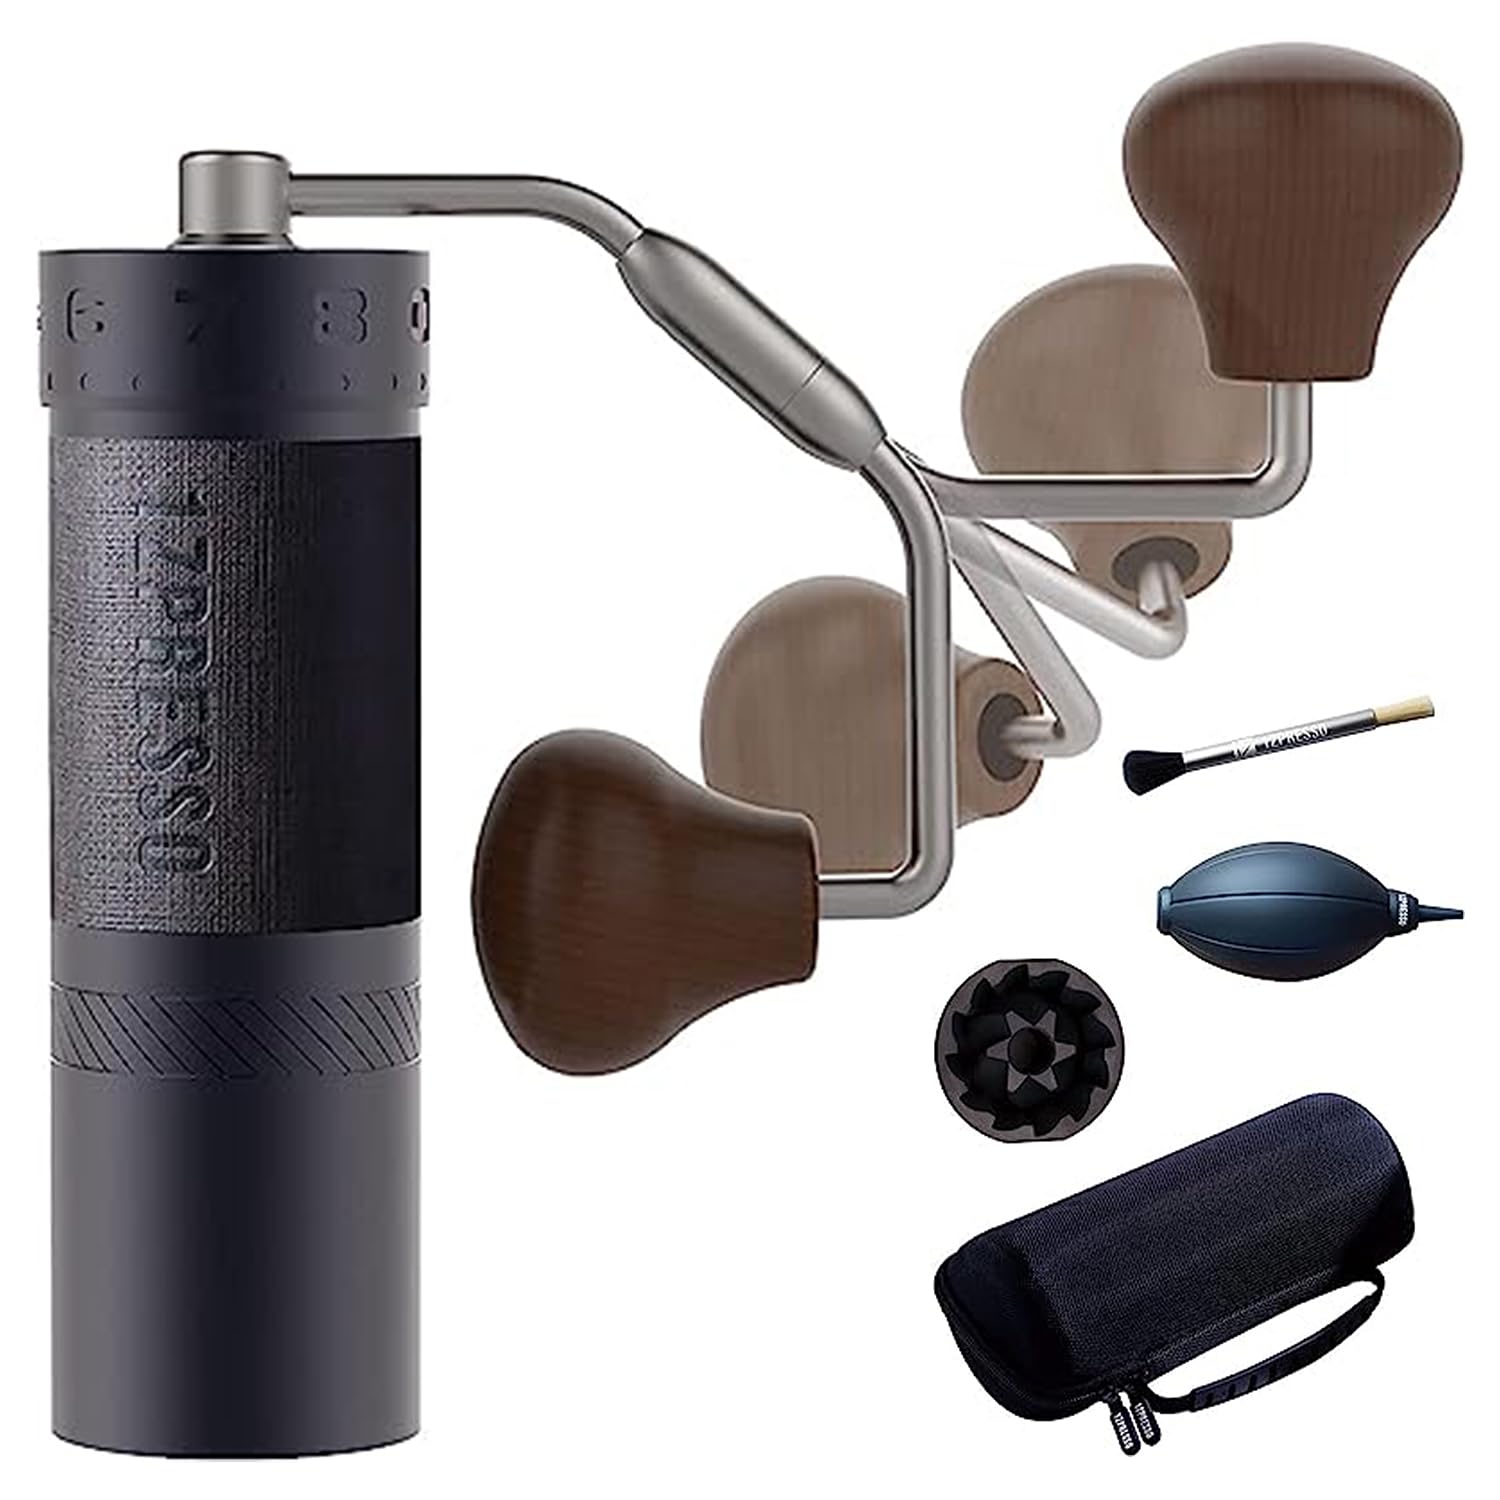 1Zpresso Manual Coffee Grinder Magnet Catch Cup Capacity 40g